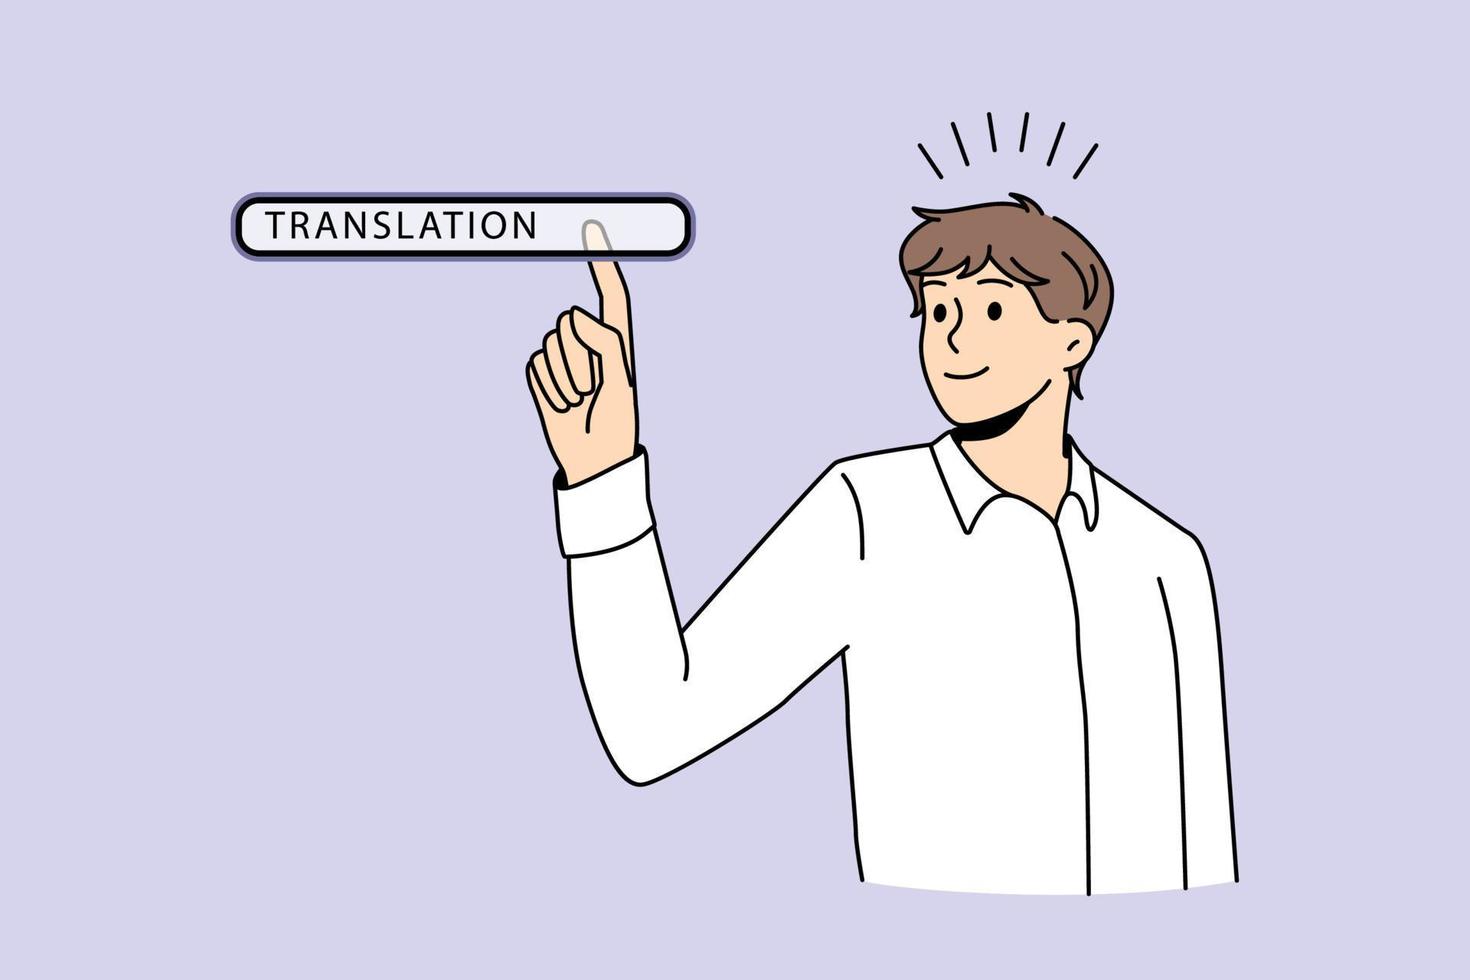 Translation online technologies button concept. Young man worker choosing translation in search bar on virtual screen language transcription internet networking vector illustration